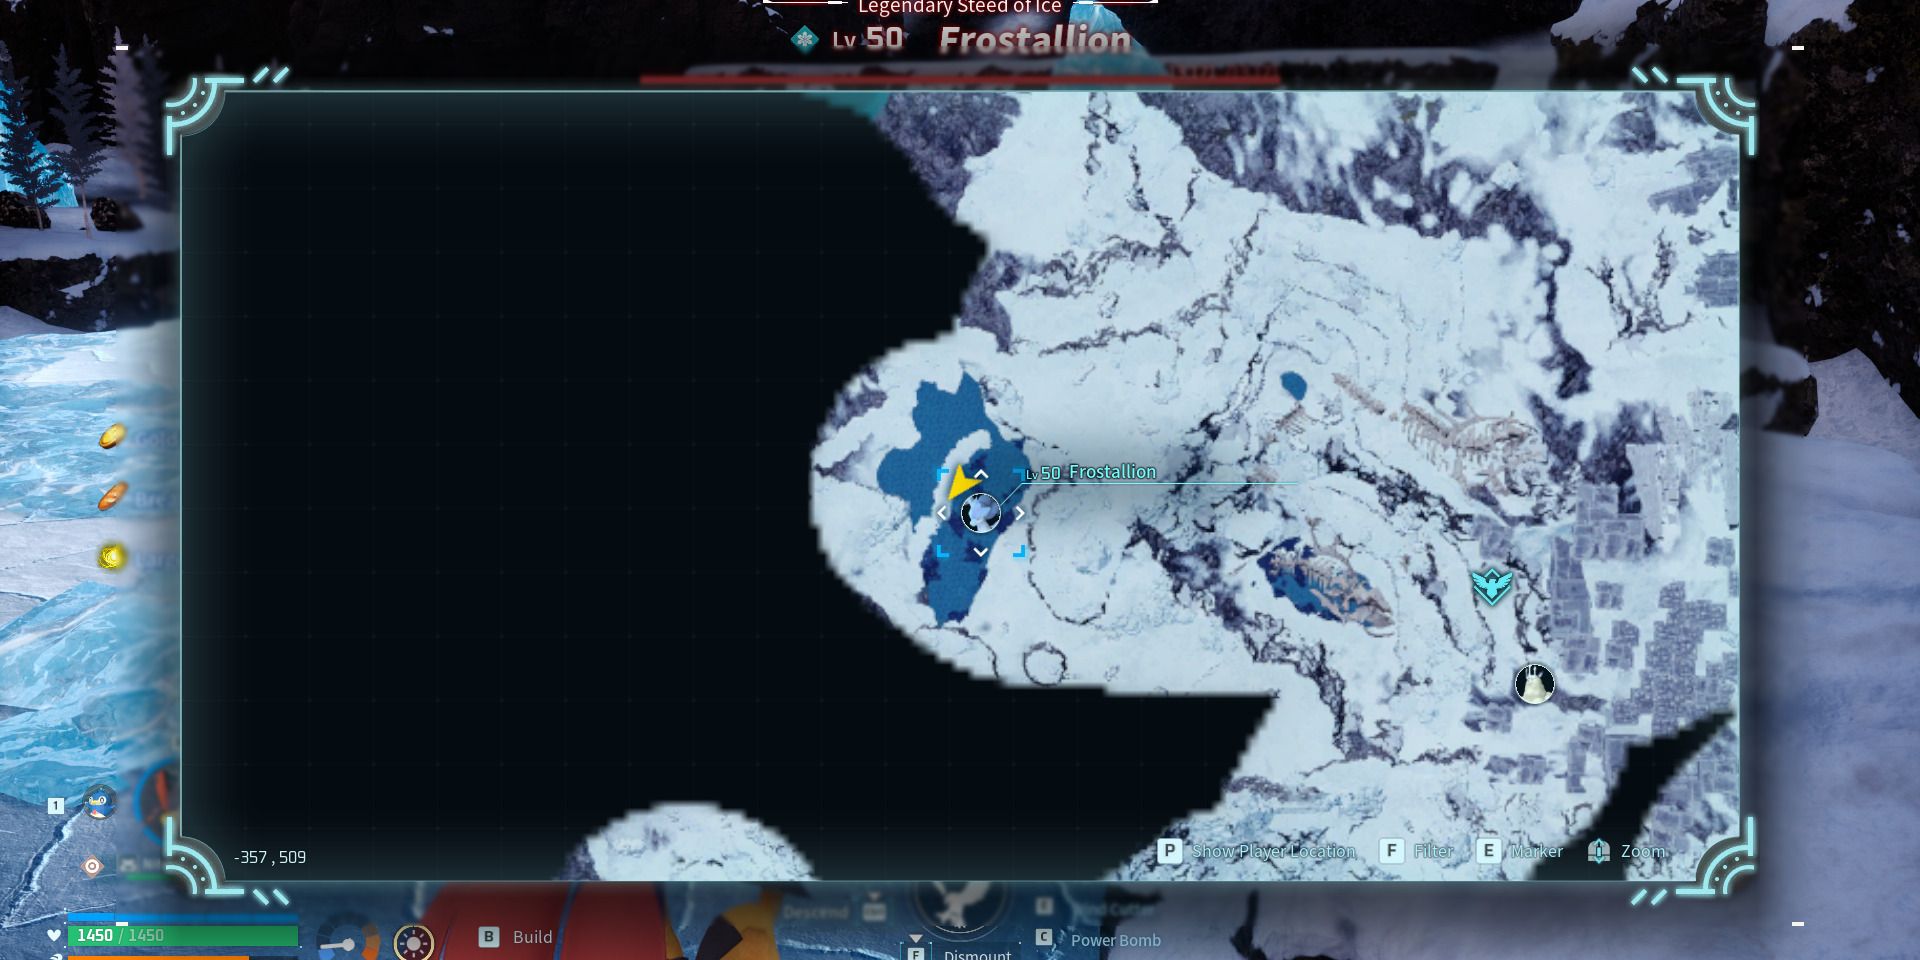 Image of the location on the map where Frostallion can be found in Palworld